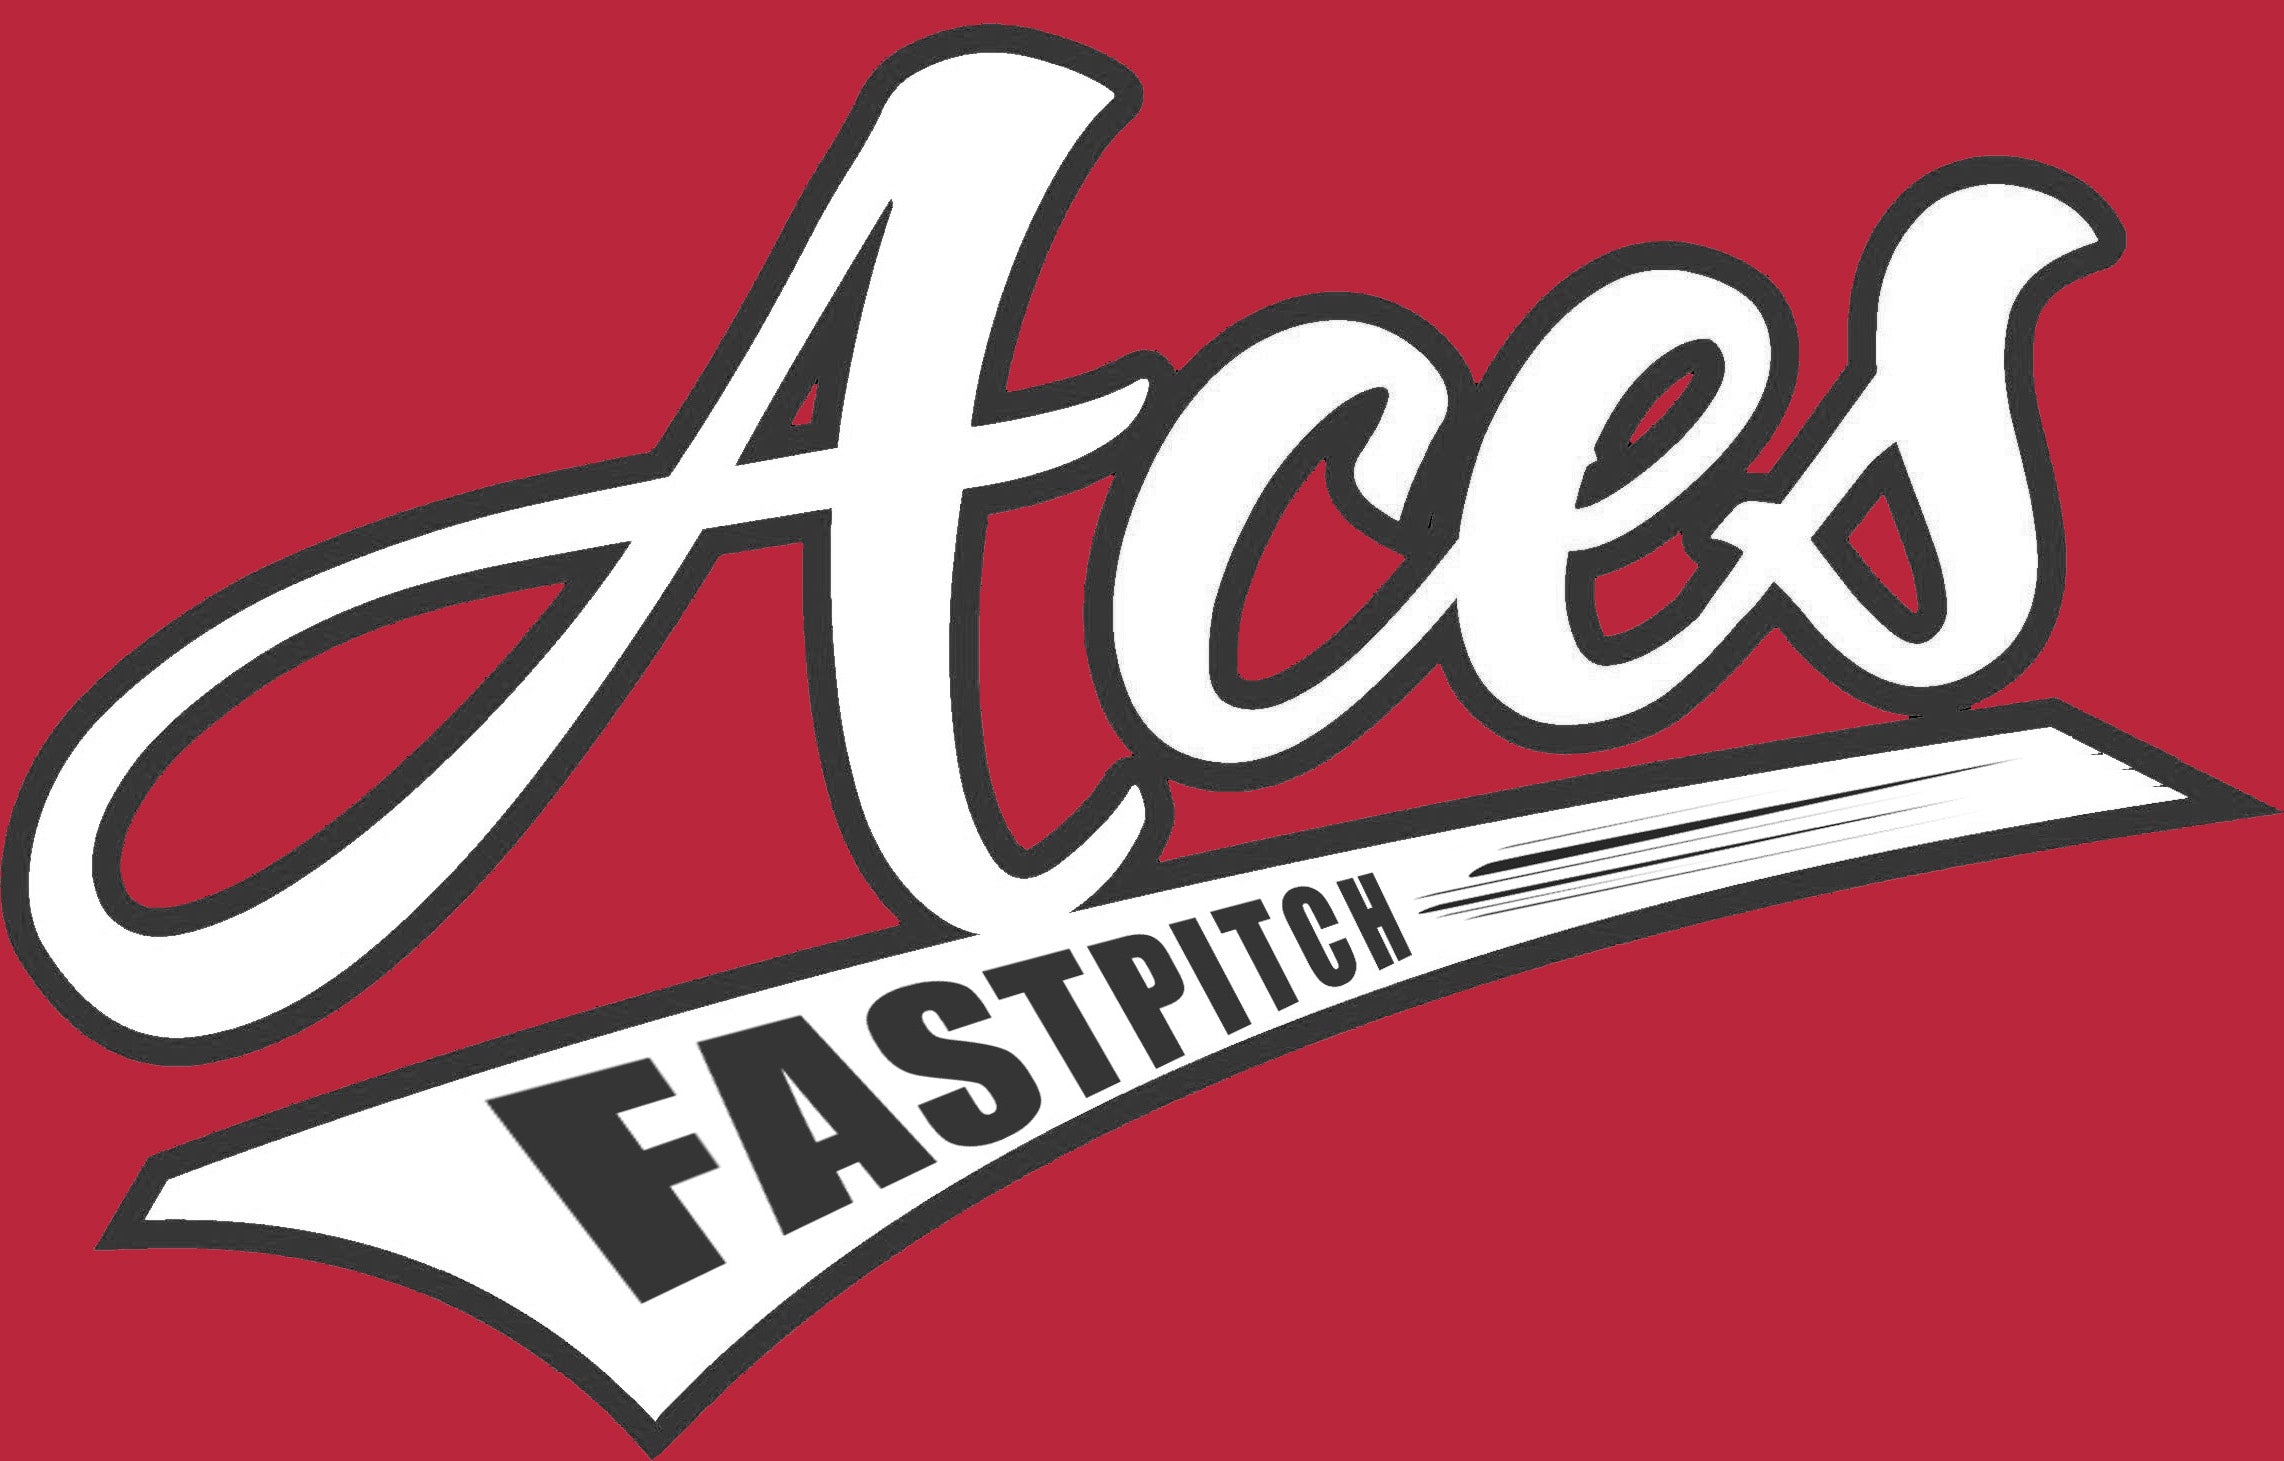 Aces Fastpitch Apparel – Show Me Weights